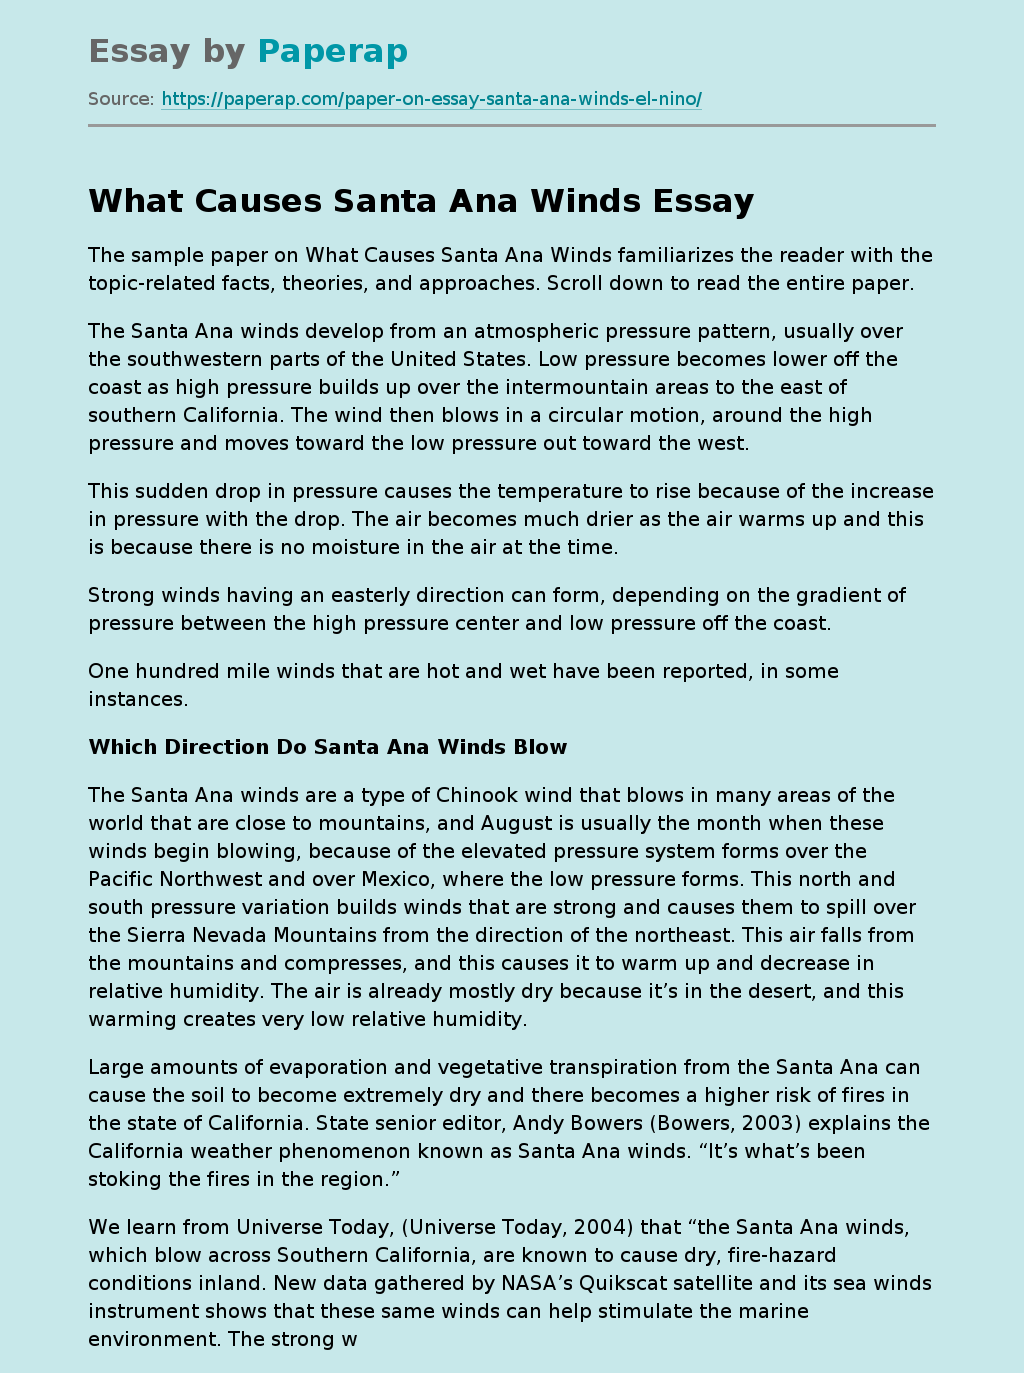 What Causes Santa Ana Winds